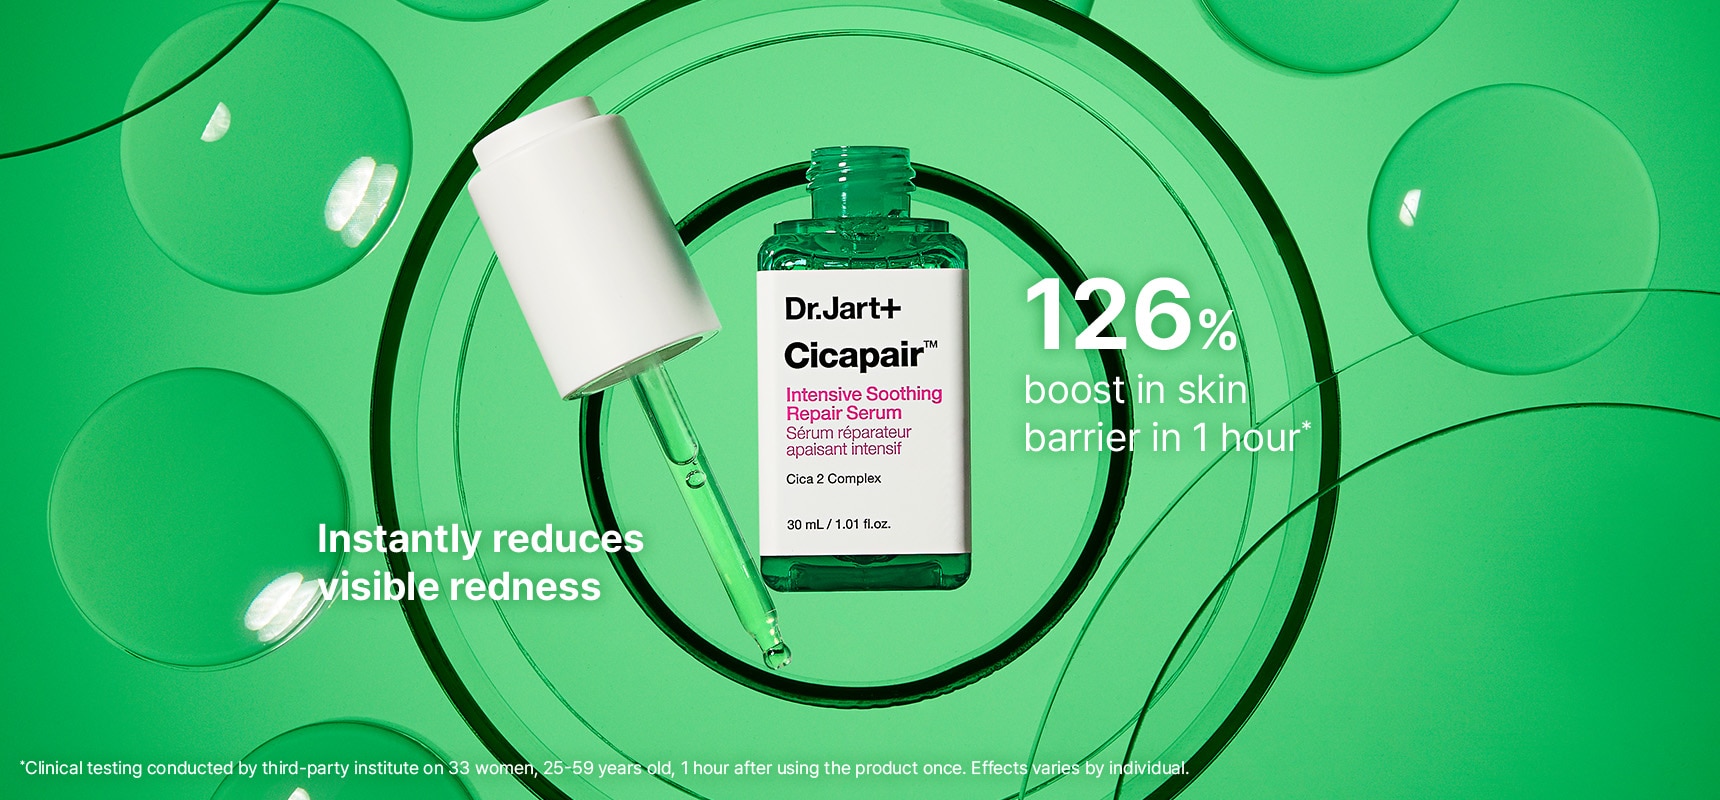 Cicapair Serum product bottle with application dropper. Instantly reduces visible redness.+126% boost in skin barrier after 1 hr